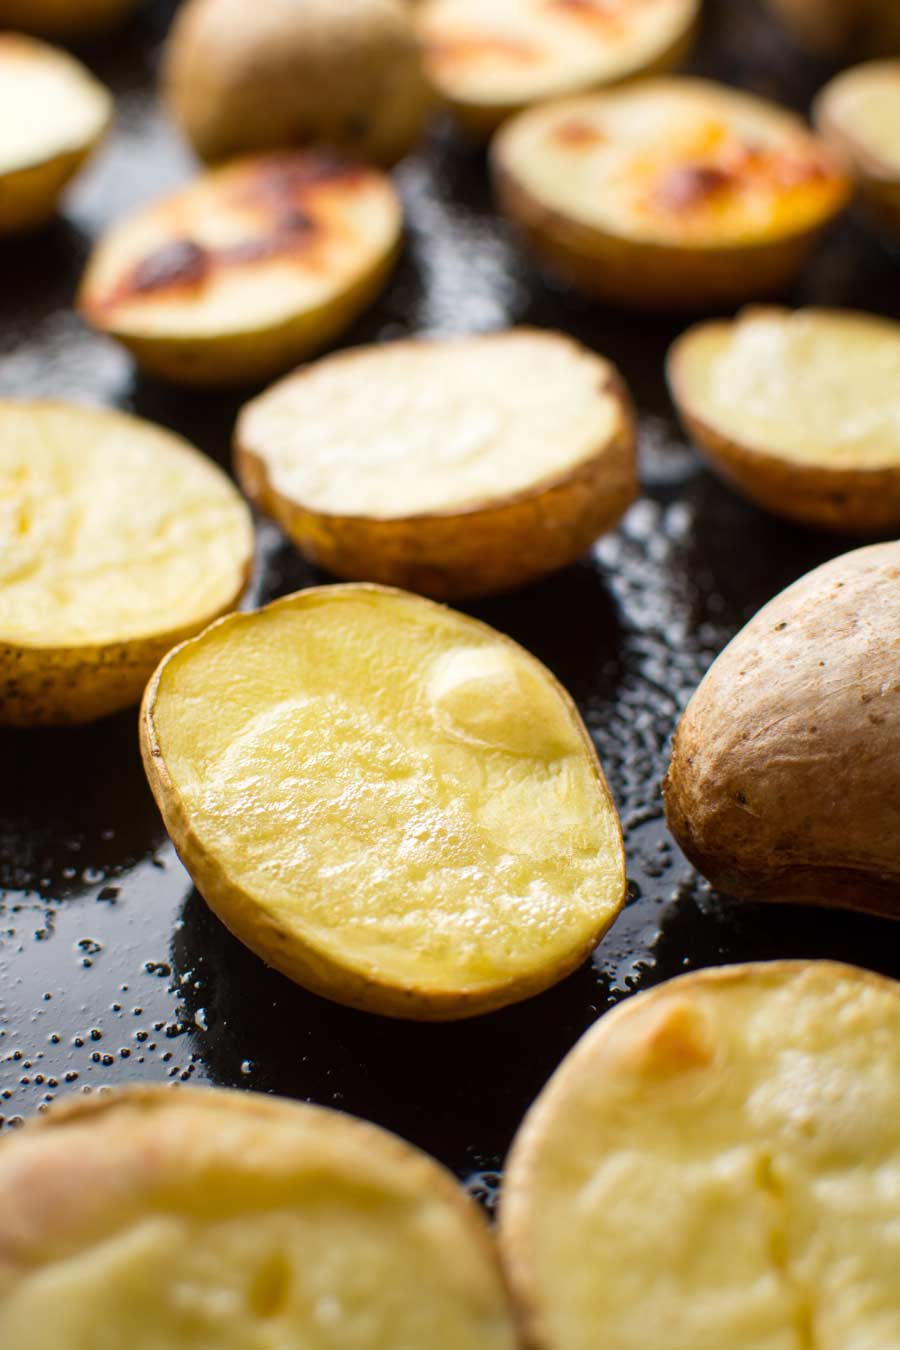 Baked potatoes out of the oven